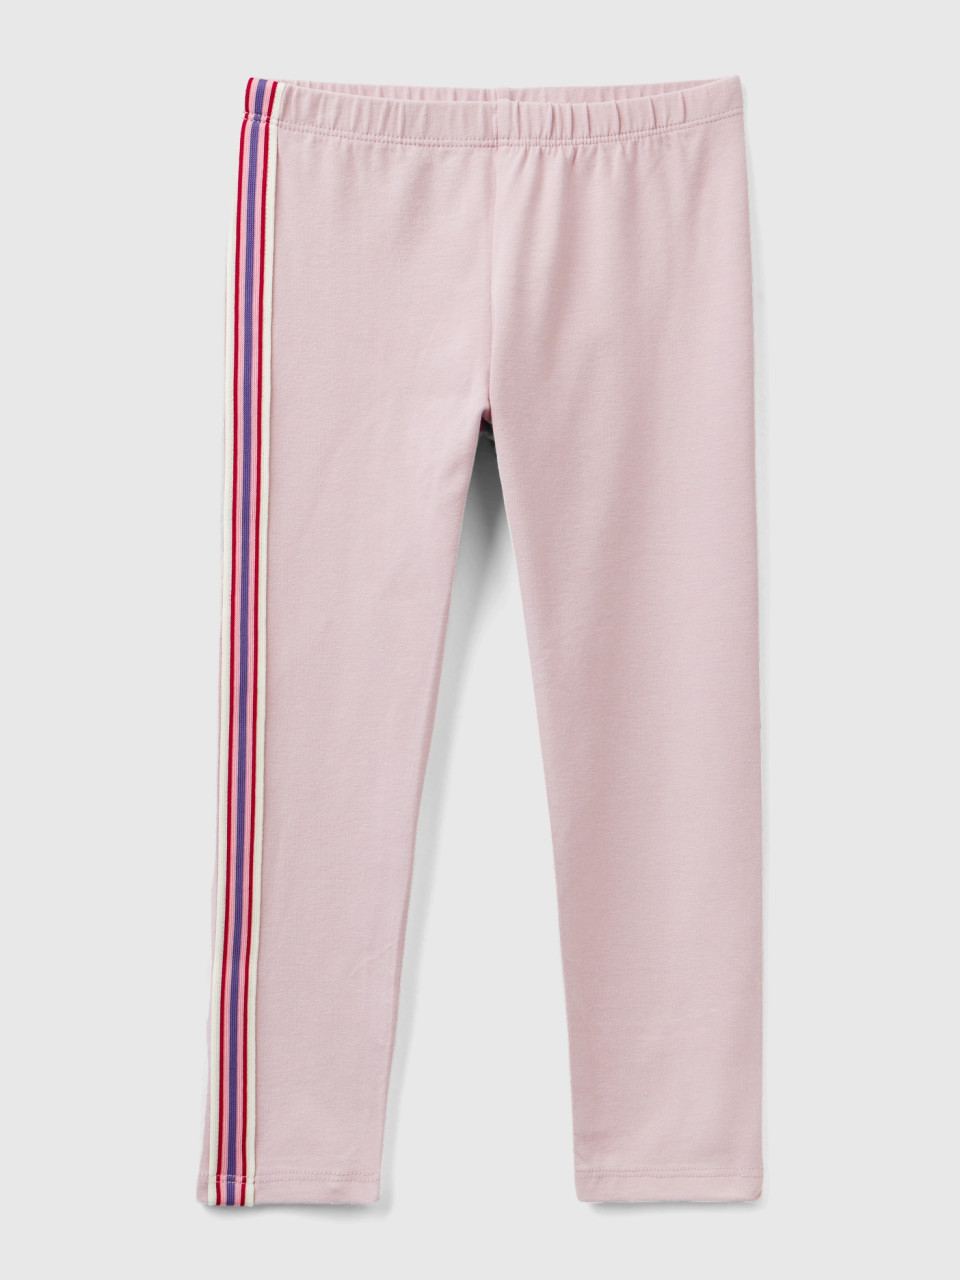 Benetton, Leggings With Ribbed Band, Pink, Kids